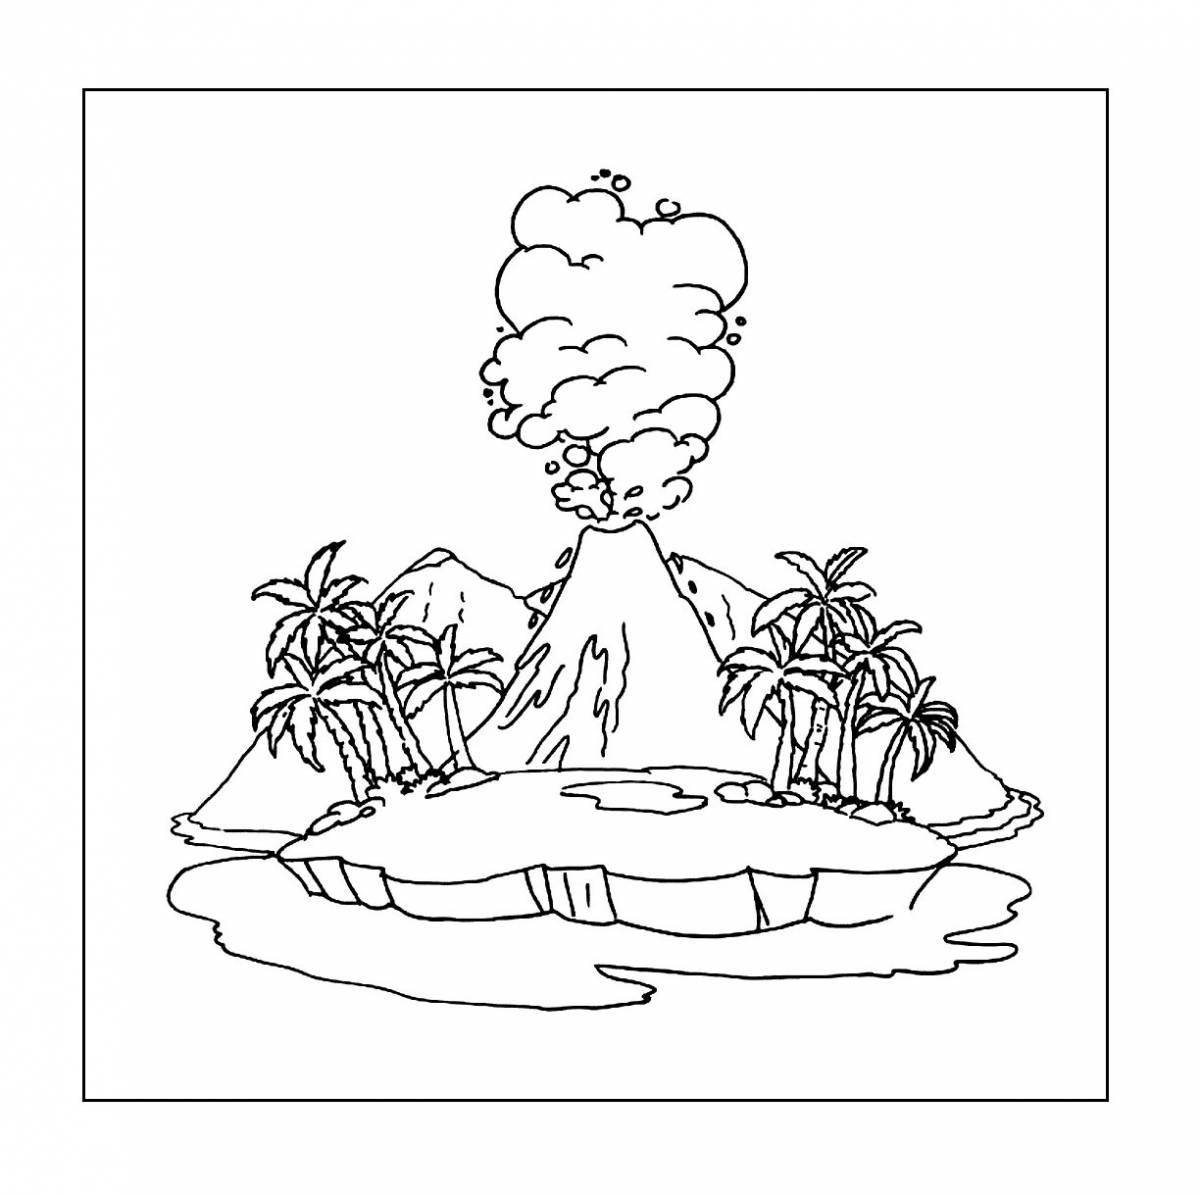 Glowing island coloring book for kids